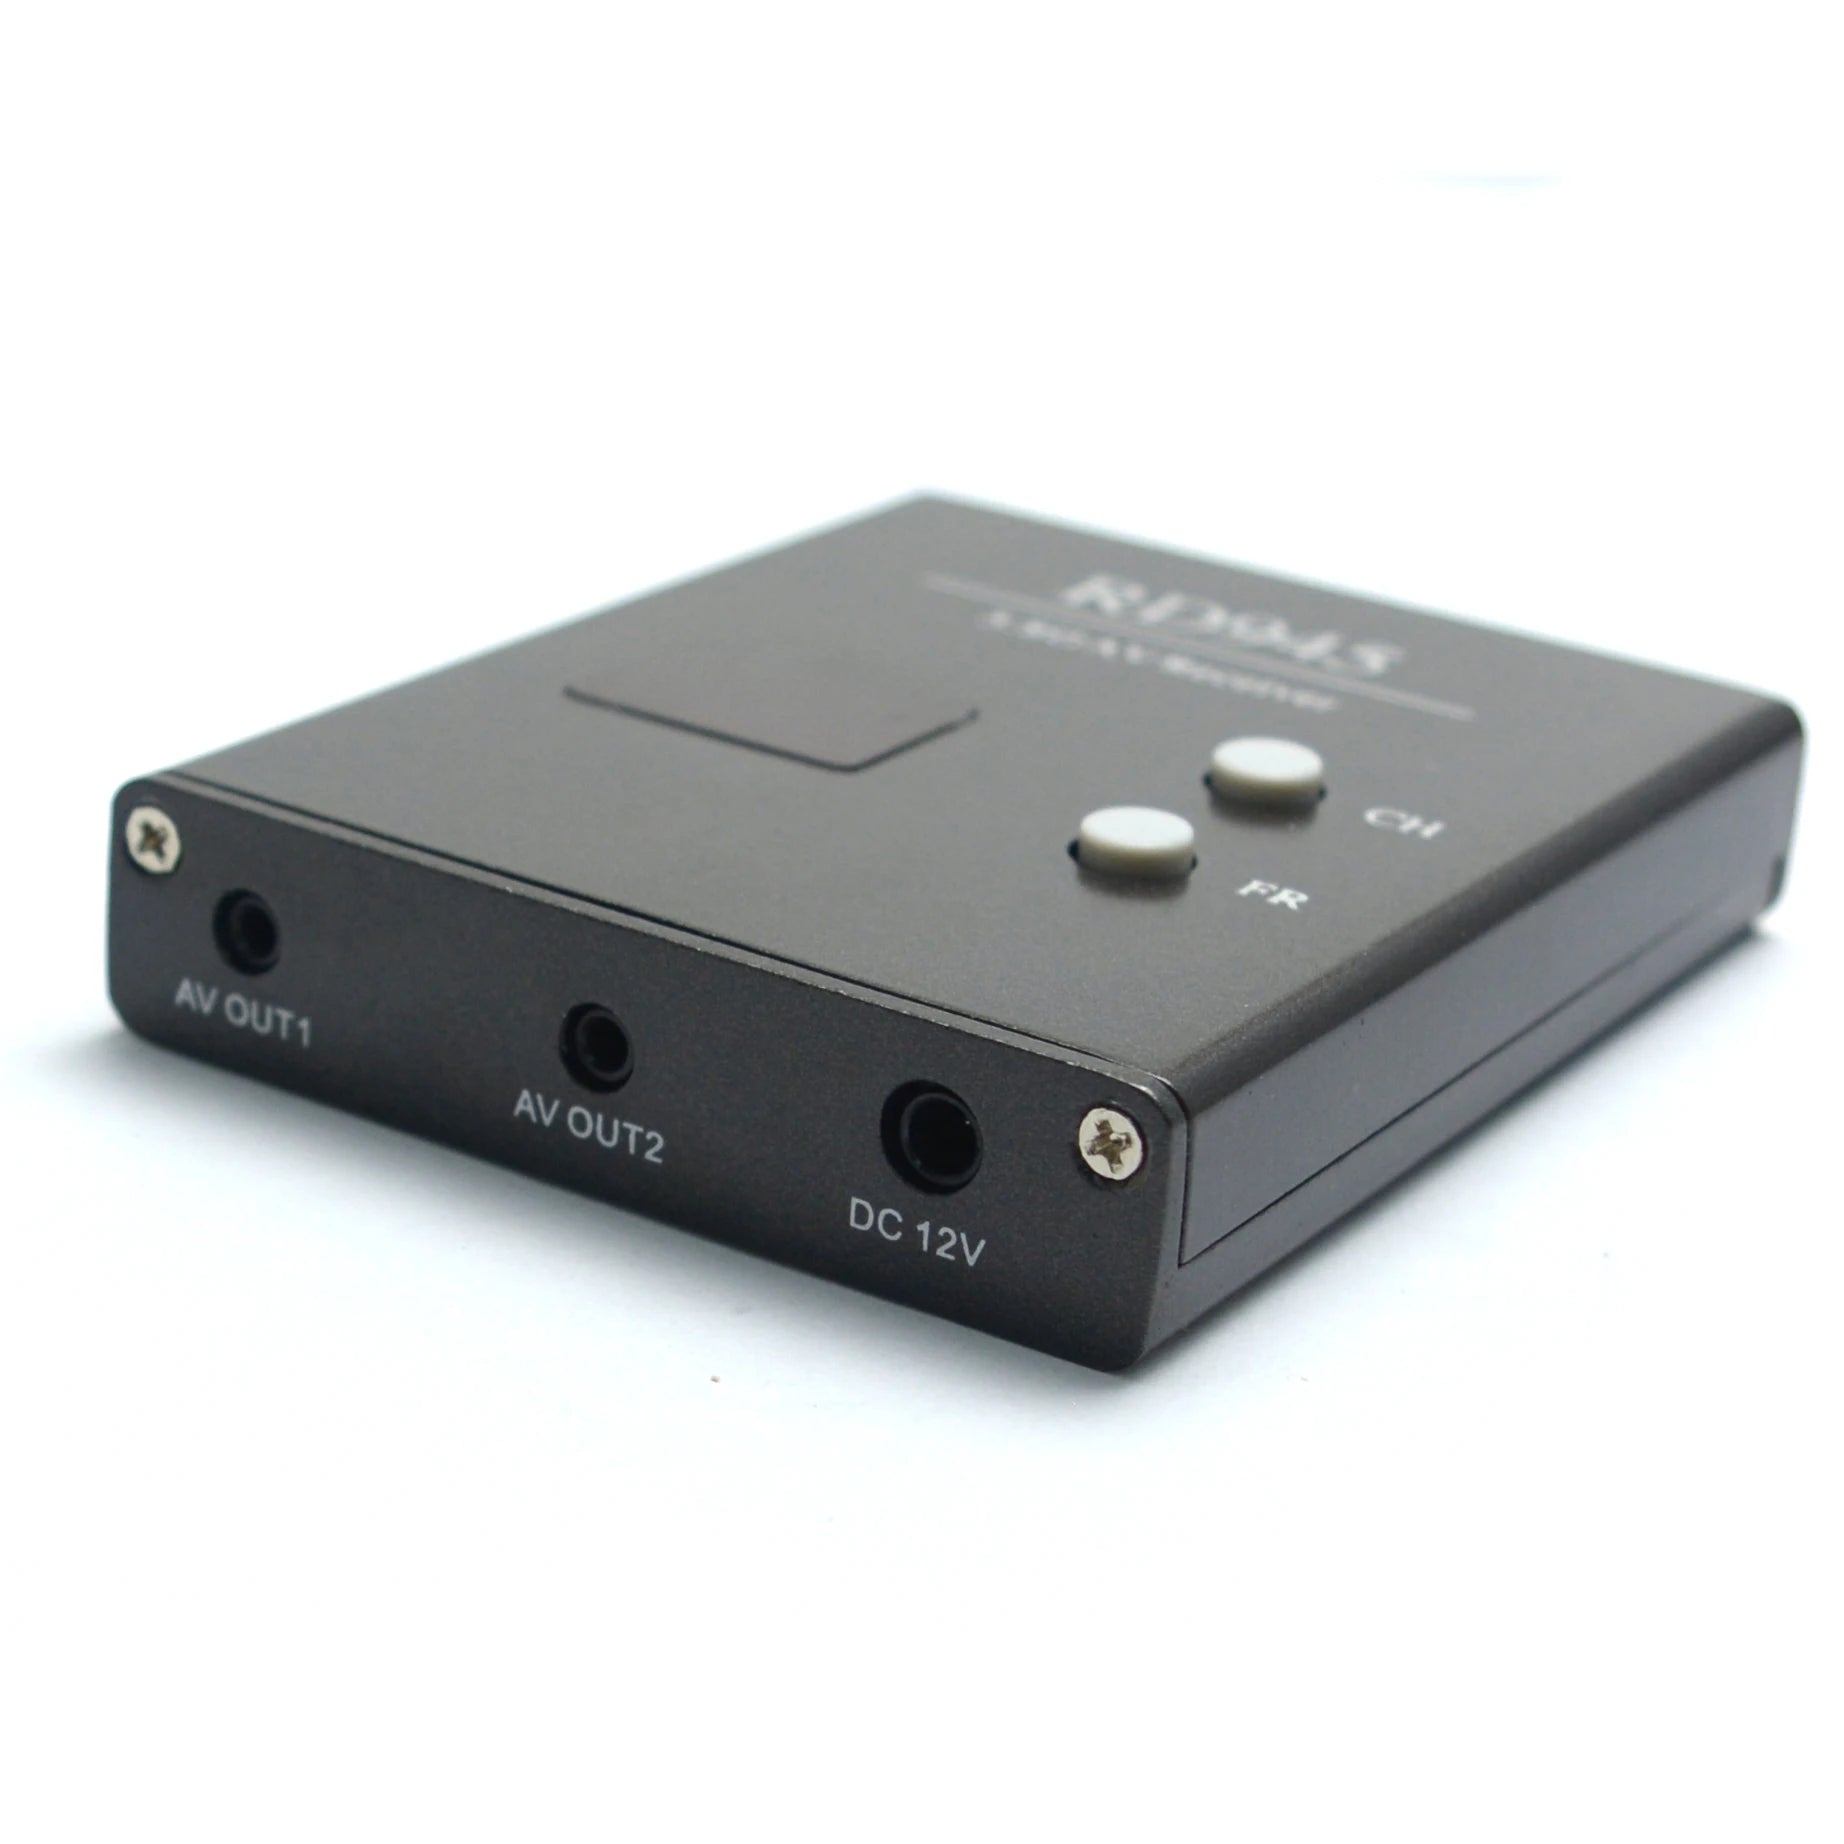 RD945 & TS832 Wireless Audio/Video Transmitter for 